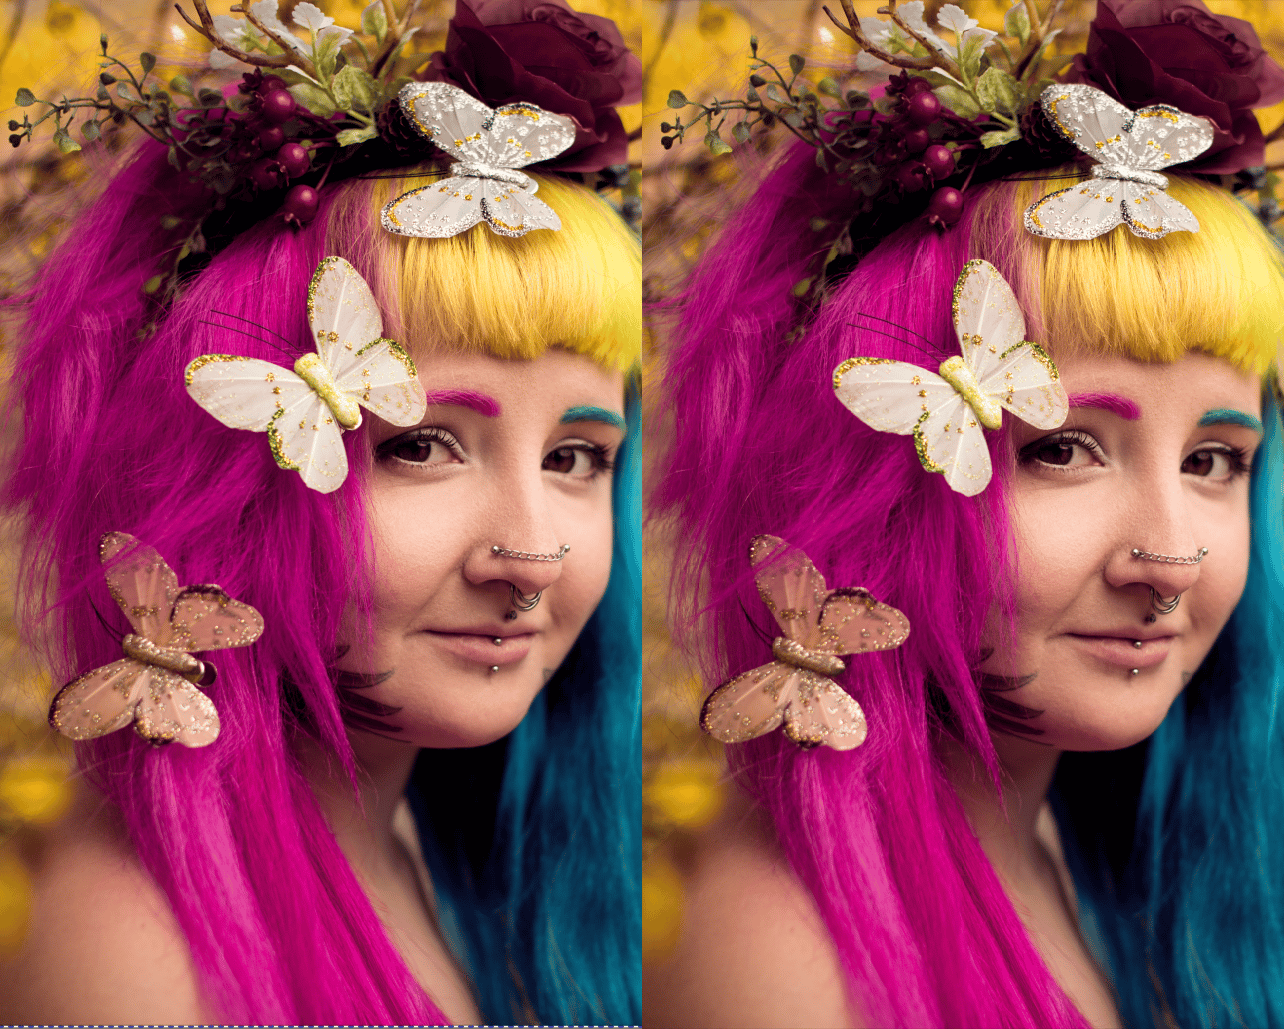 Editing Springtime Portraits II: Doing Advanced Retouching in the Editor